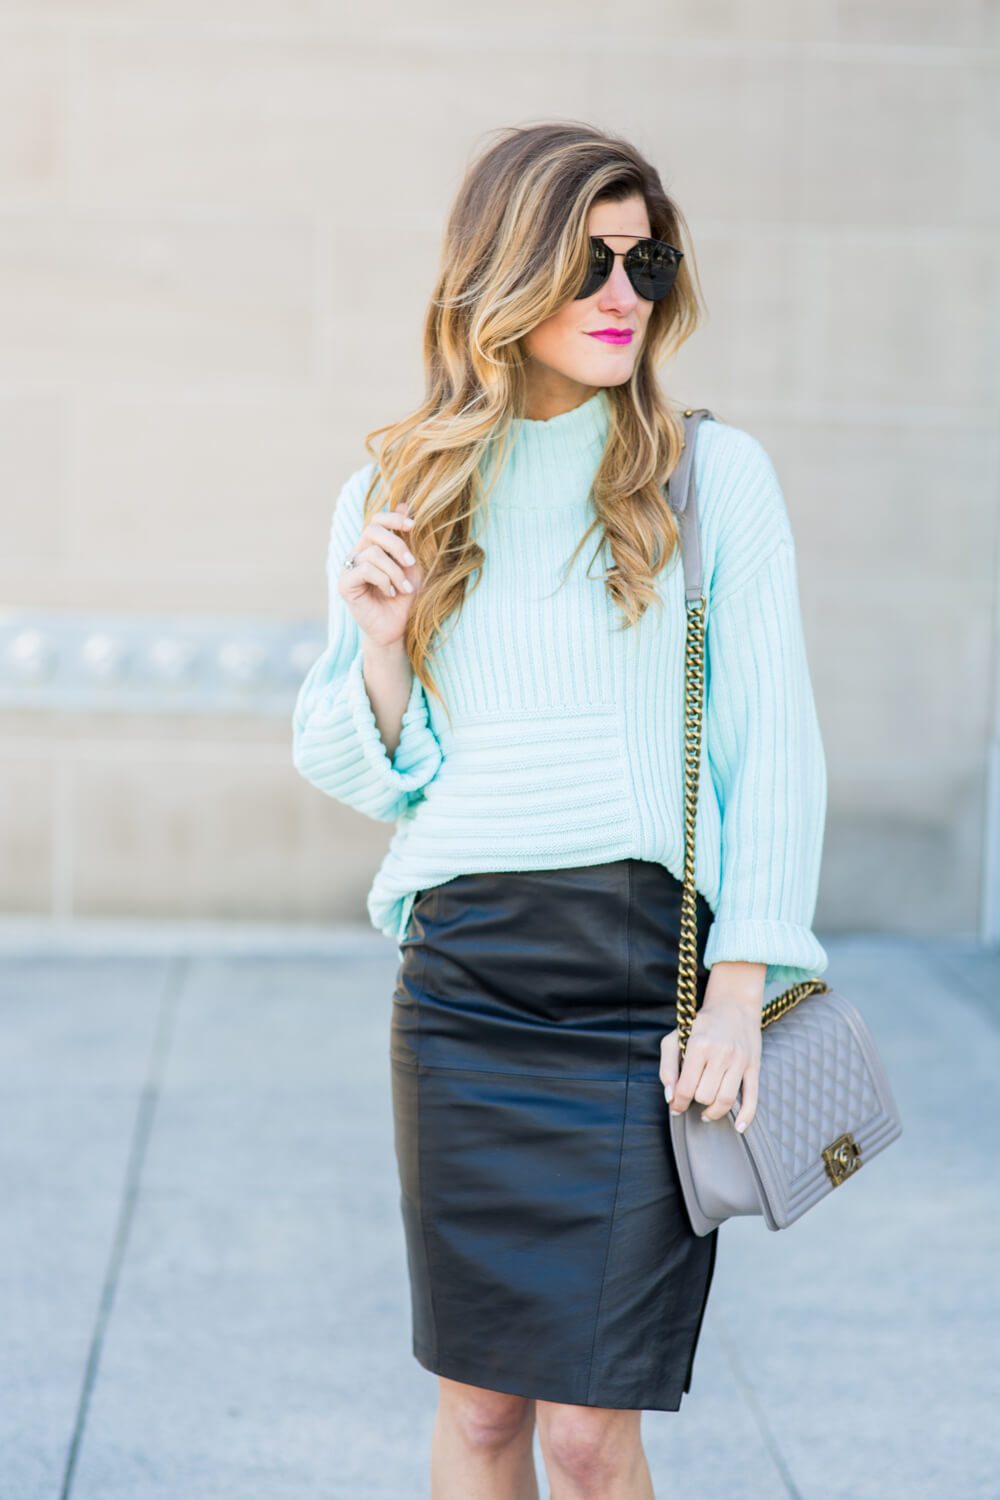 Black Leather Pencil Skirt Outfit - How To Style a Leather Pencil Skirt